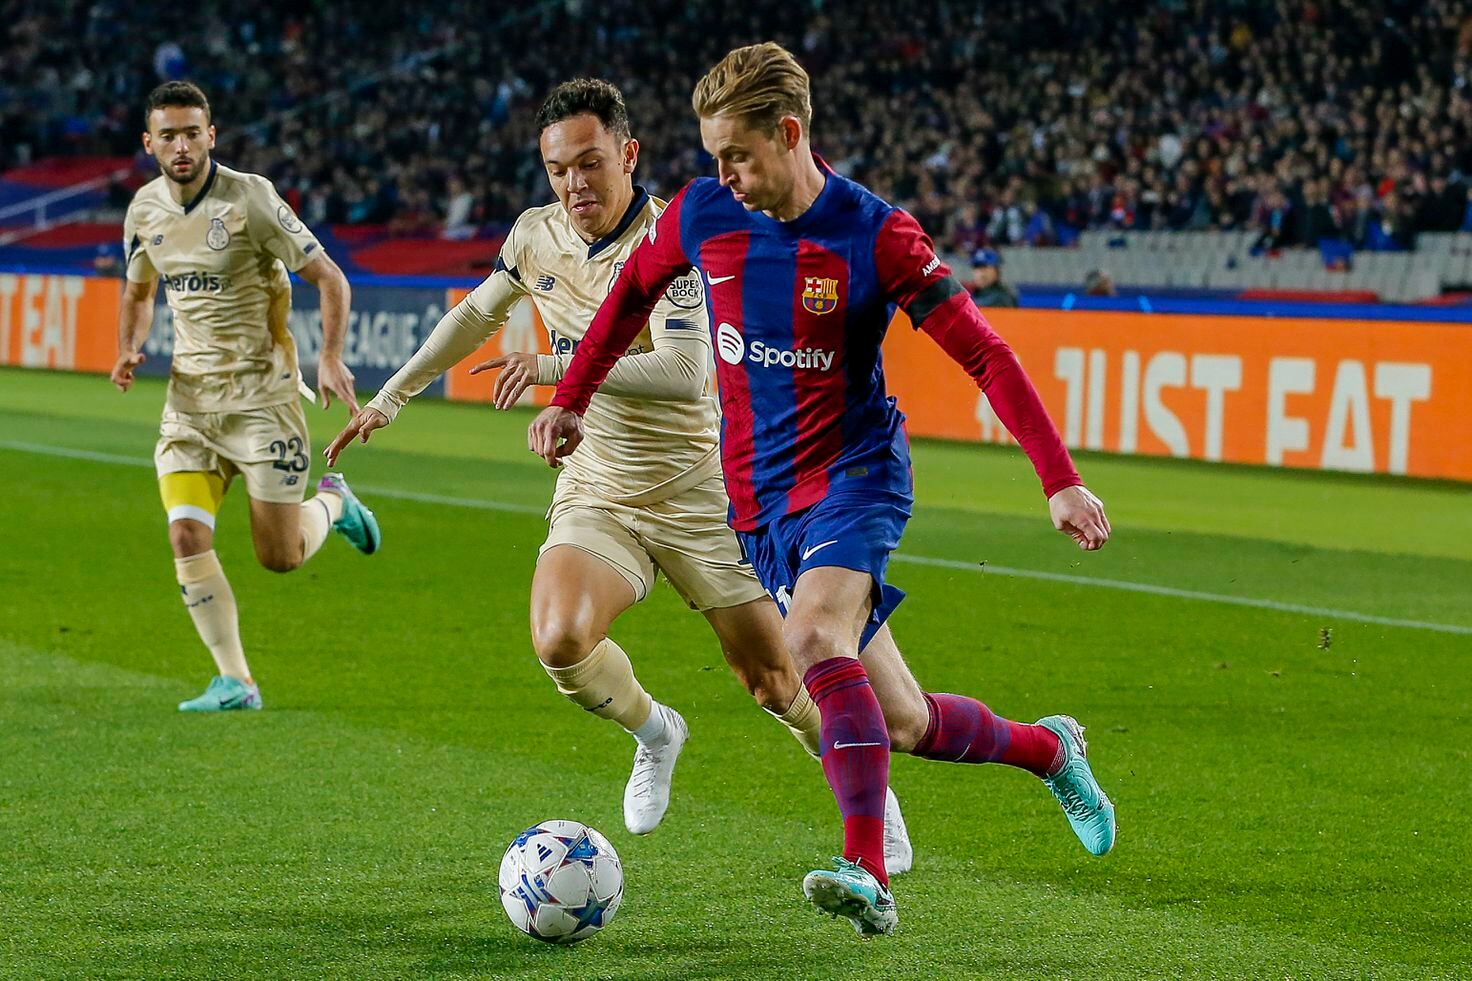 Paris Saint-Germain linked with Barcelona midfielder for second time